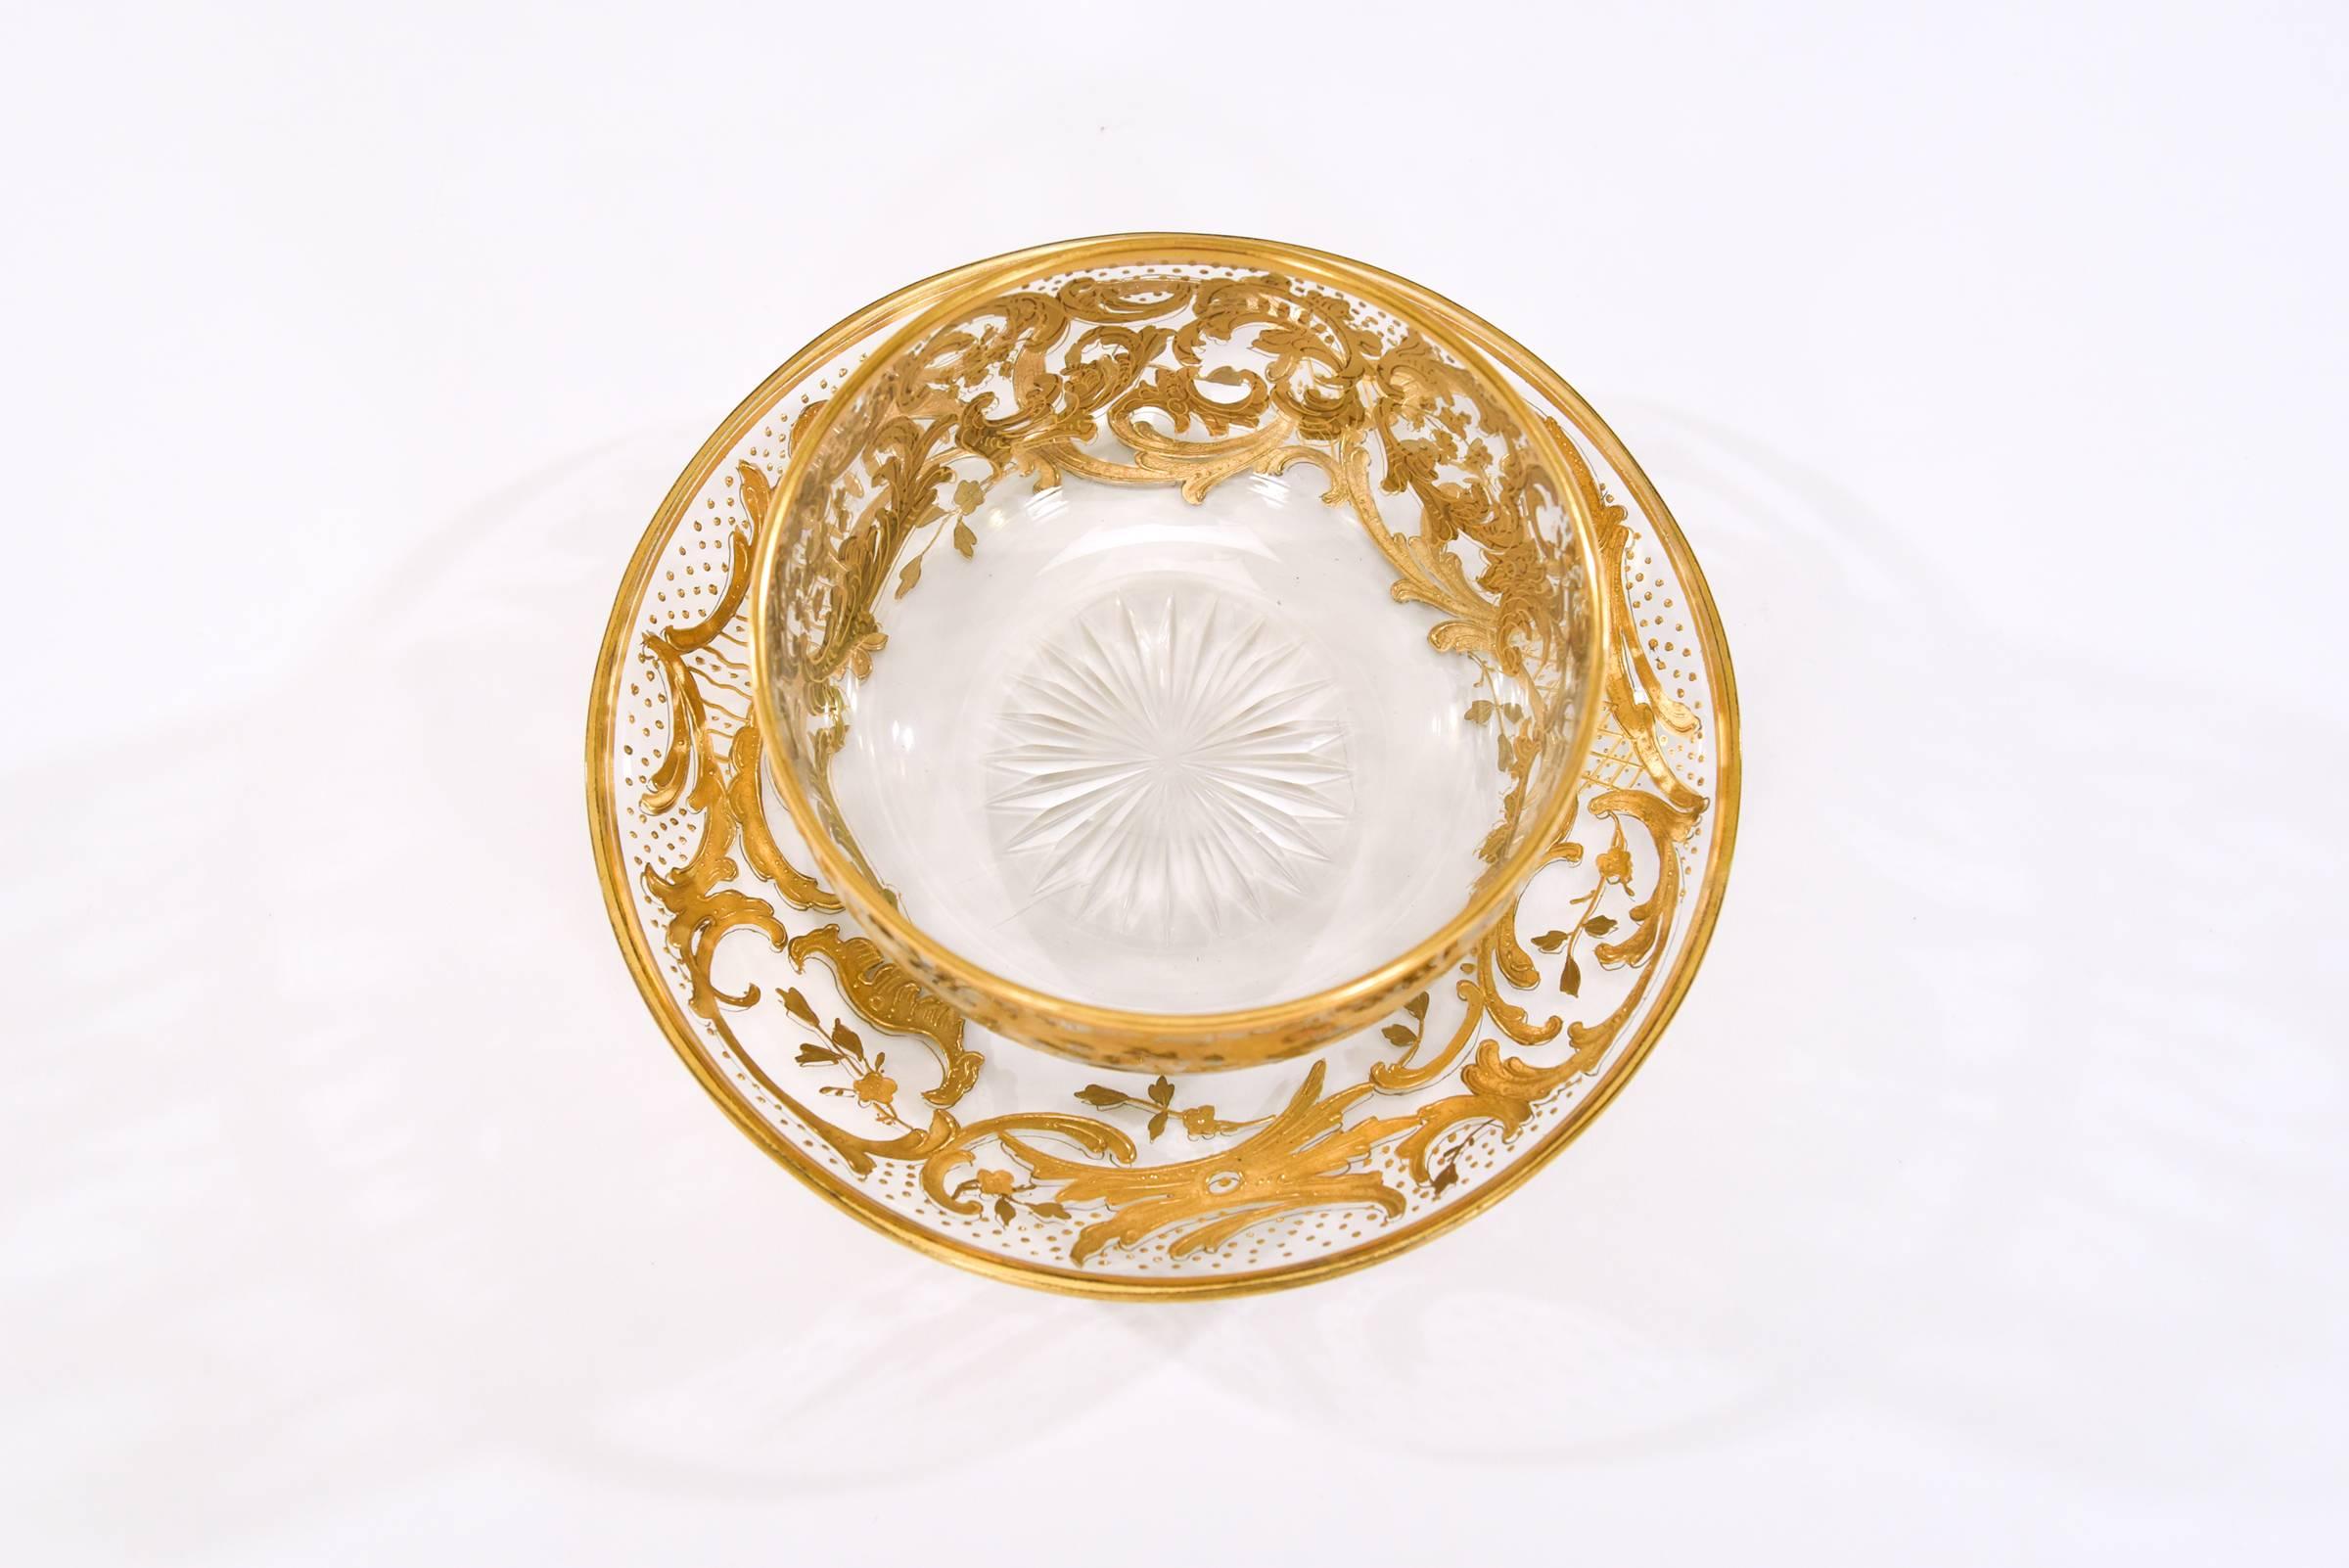 20th Century Set of 12 Baccarat Handblown Crystal Bowls & Underplates with Raised Paste Gold